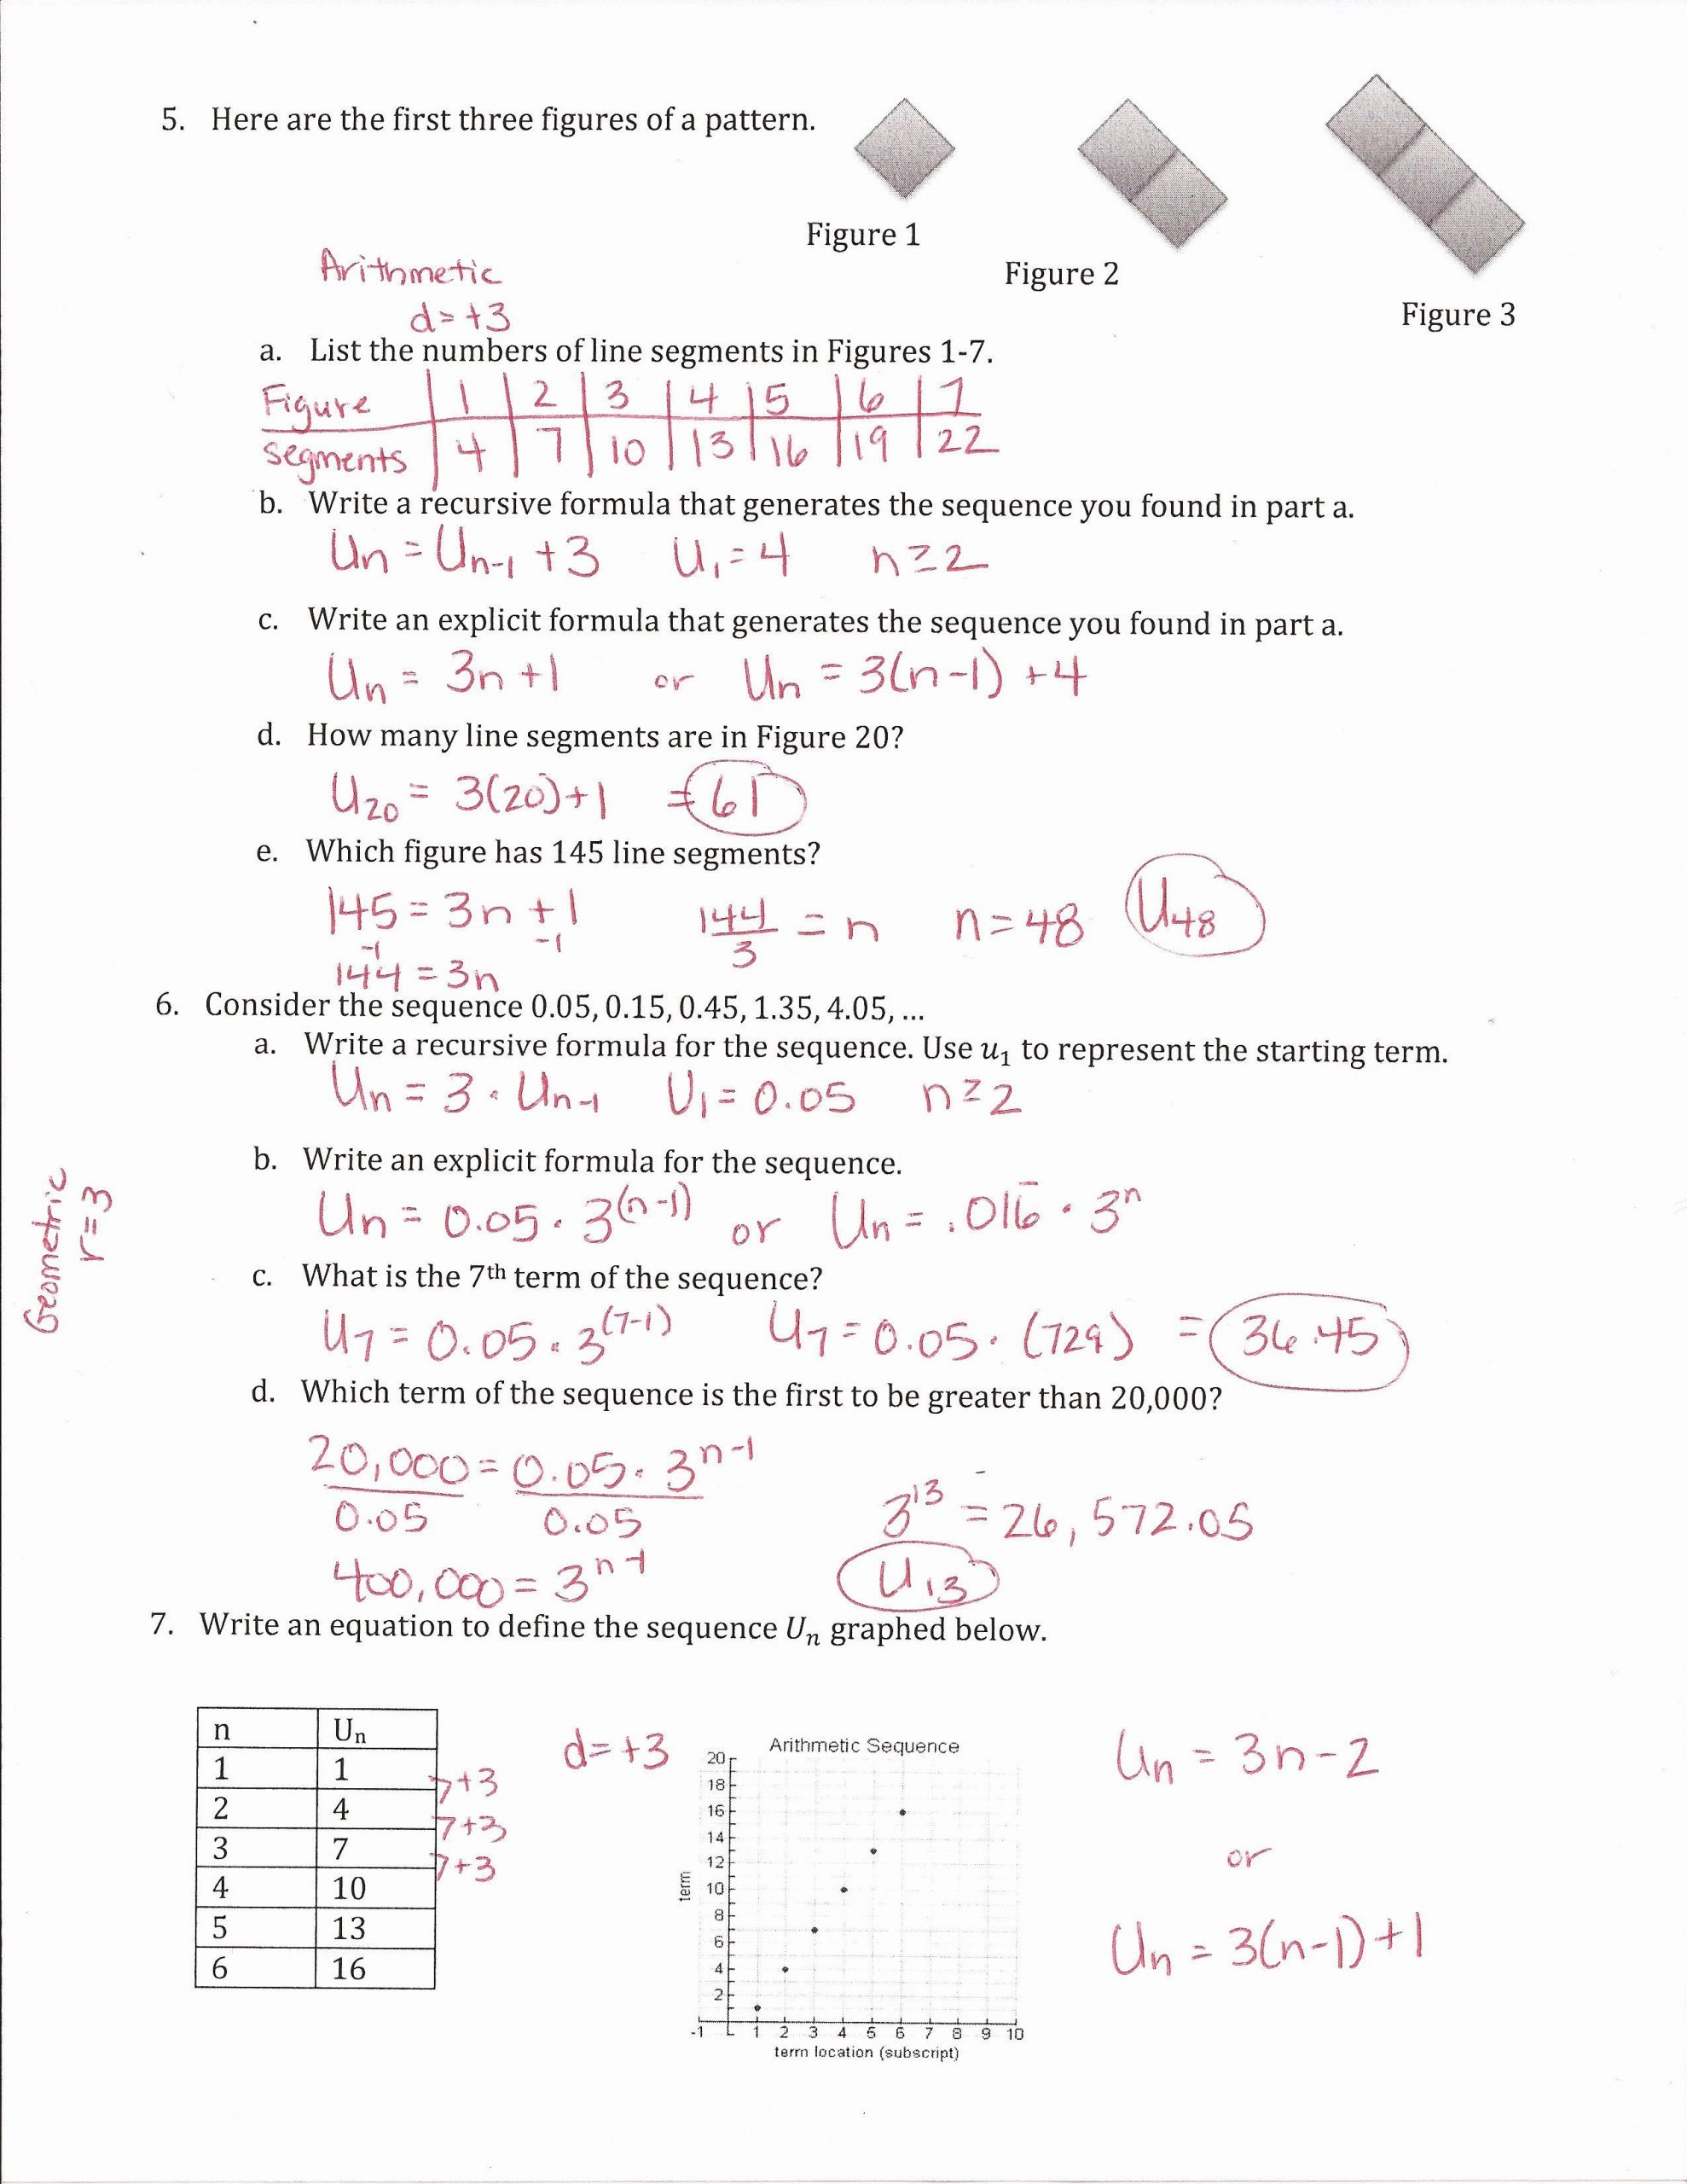 Geometric Sequences Worksheet Answers 50 Arithmetic Sequence Worksheet Answers In 2020